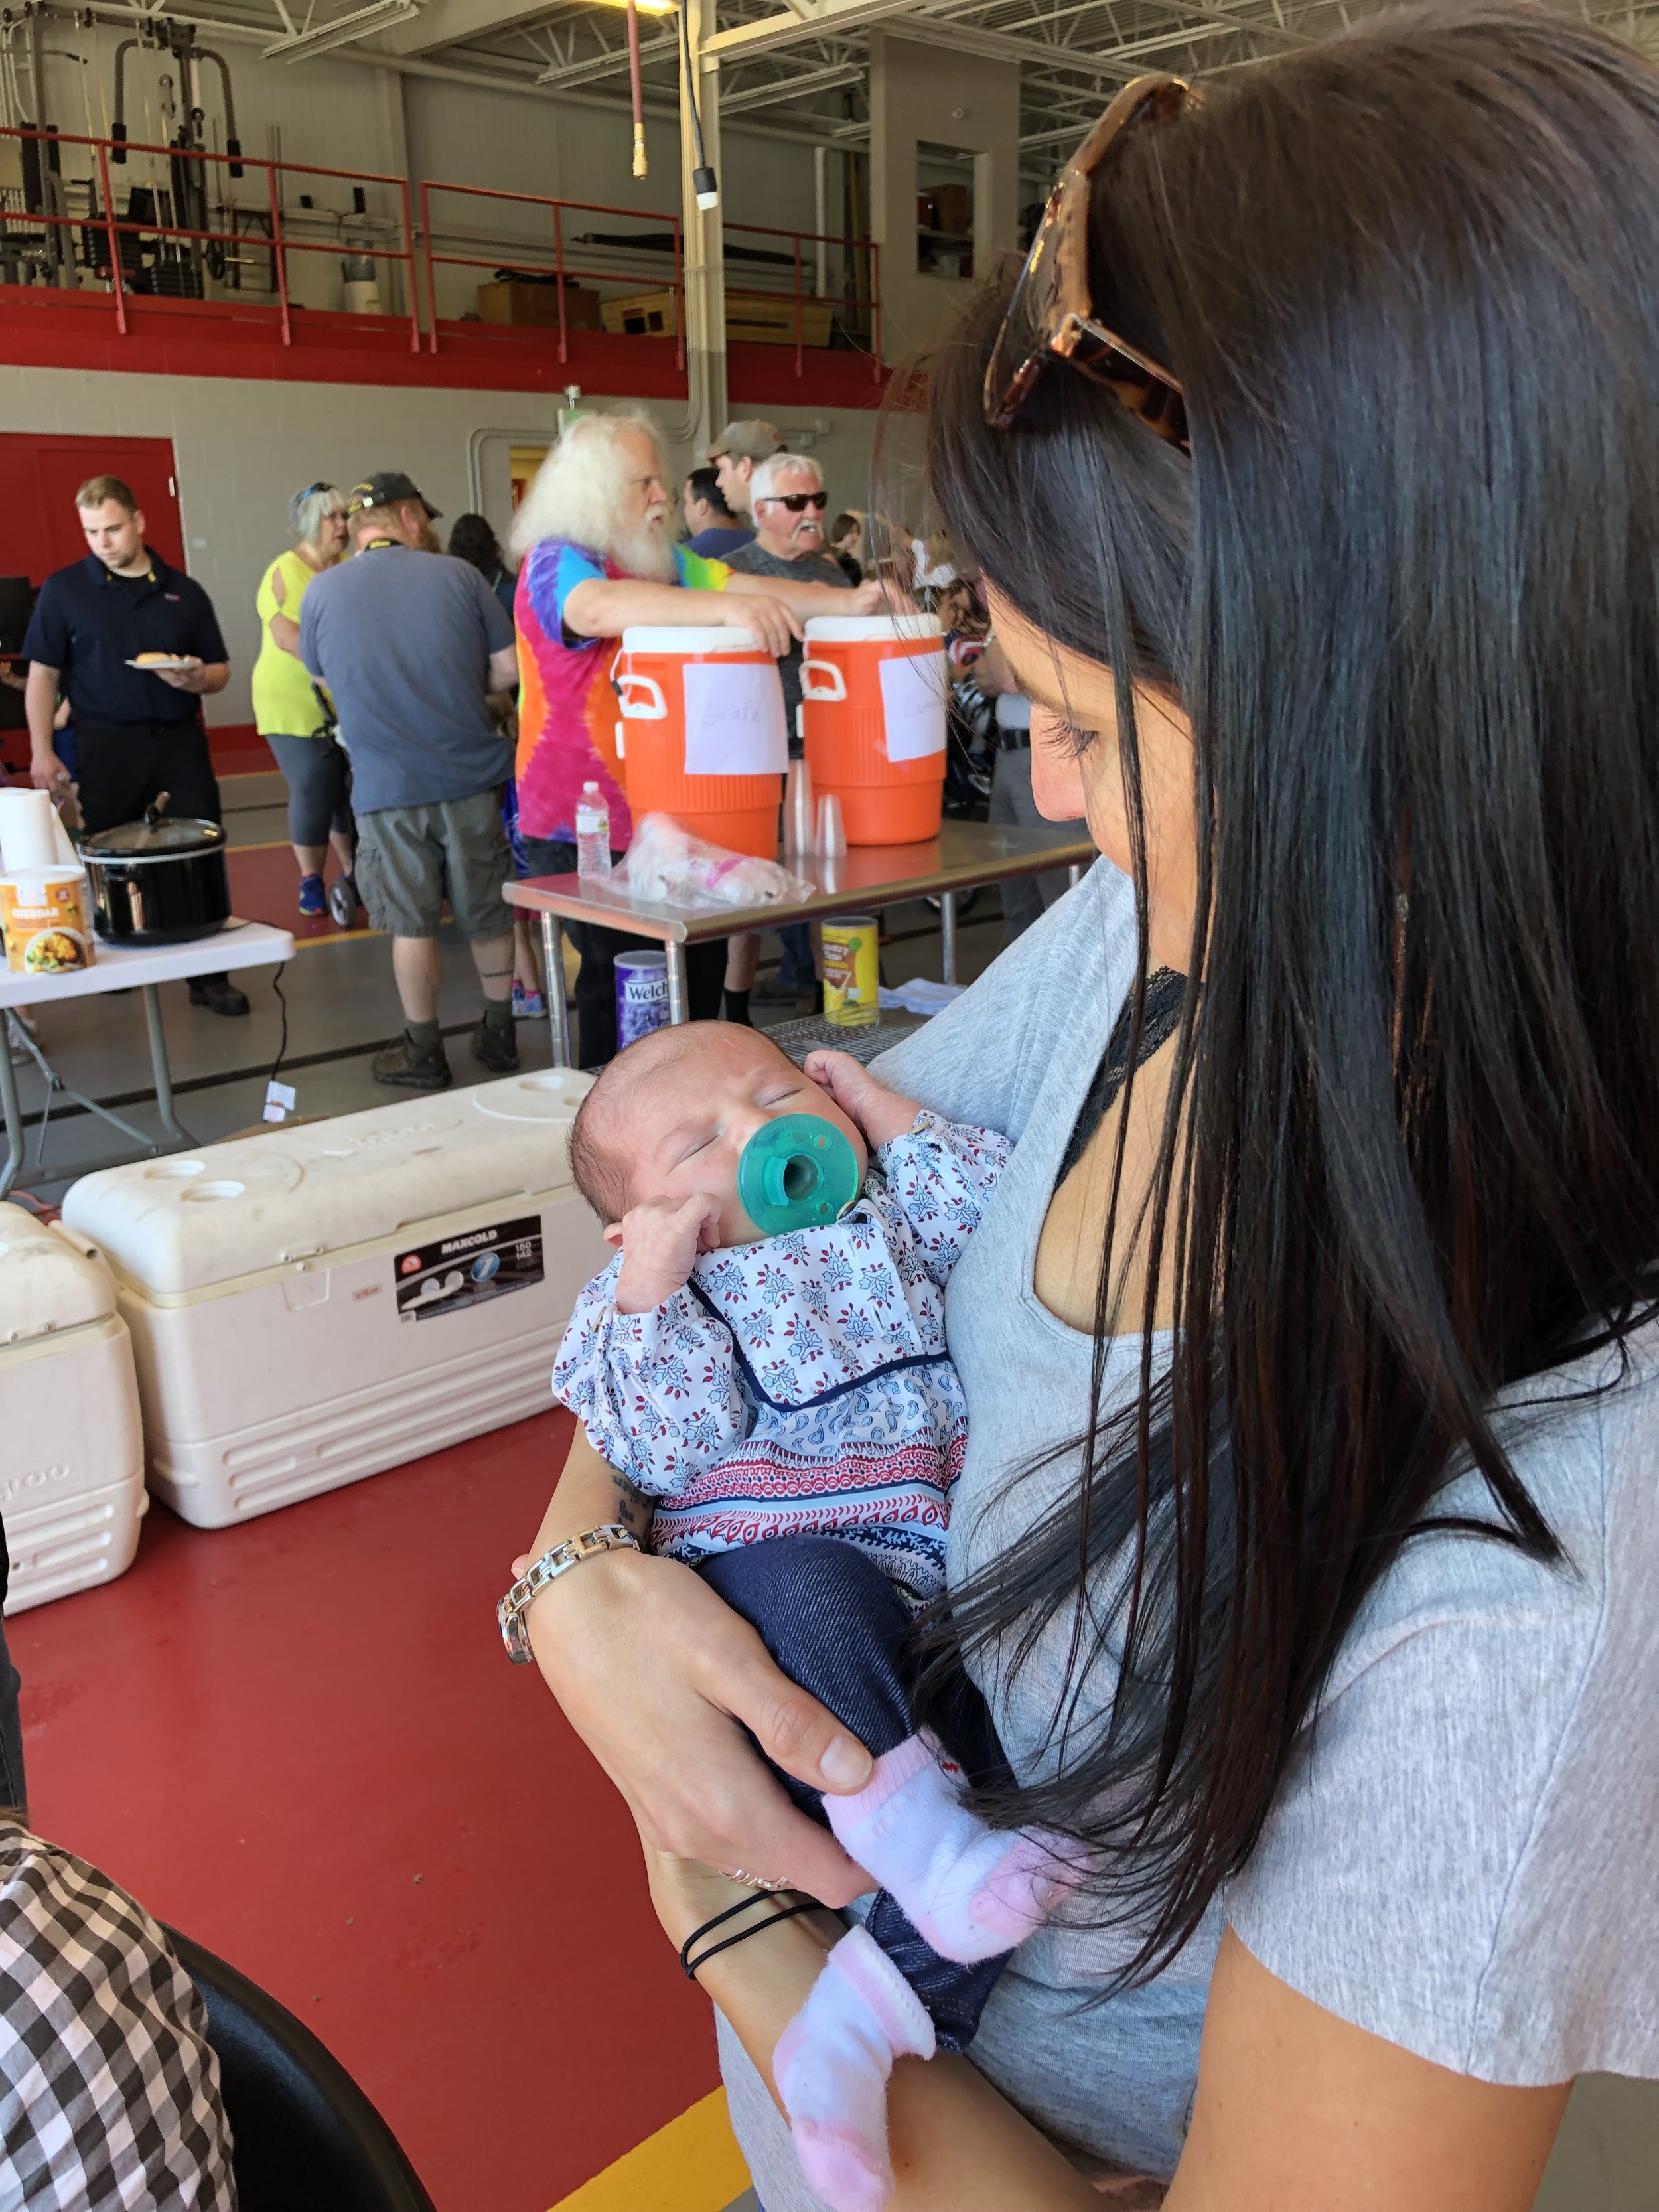   The youngest participant at the 13th annual Bike Rodeo Saturday was week old Kinsley Cole, newborn of Jessica and Royce. Holding the tiny lass was friend Kristin Pelkey.  